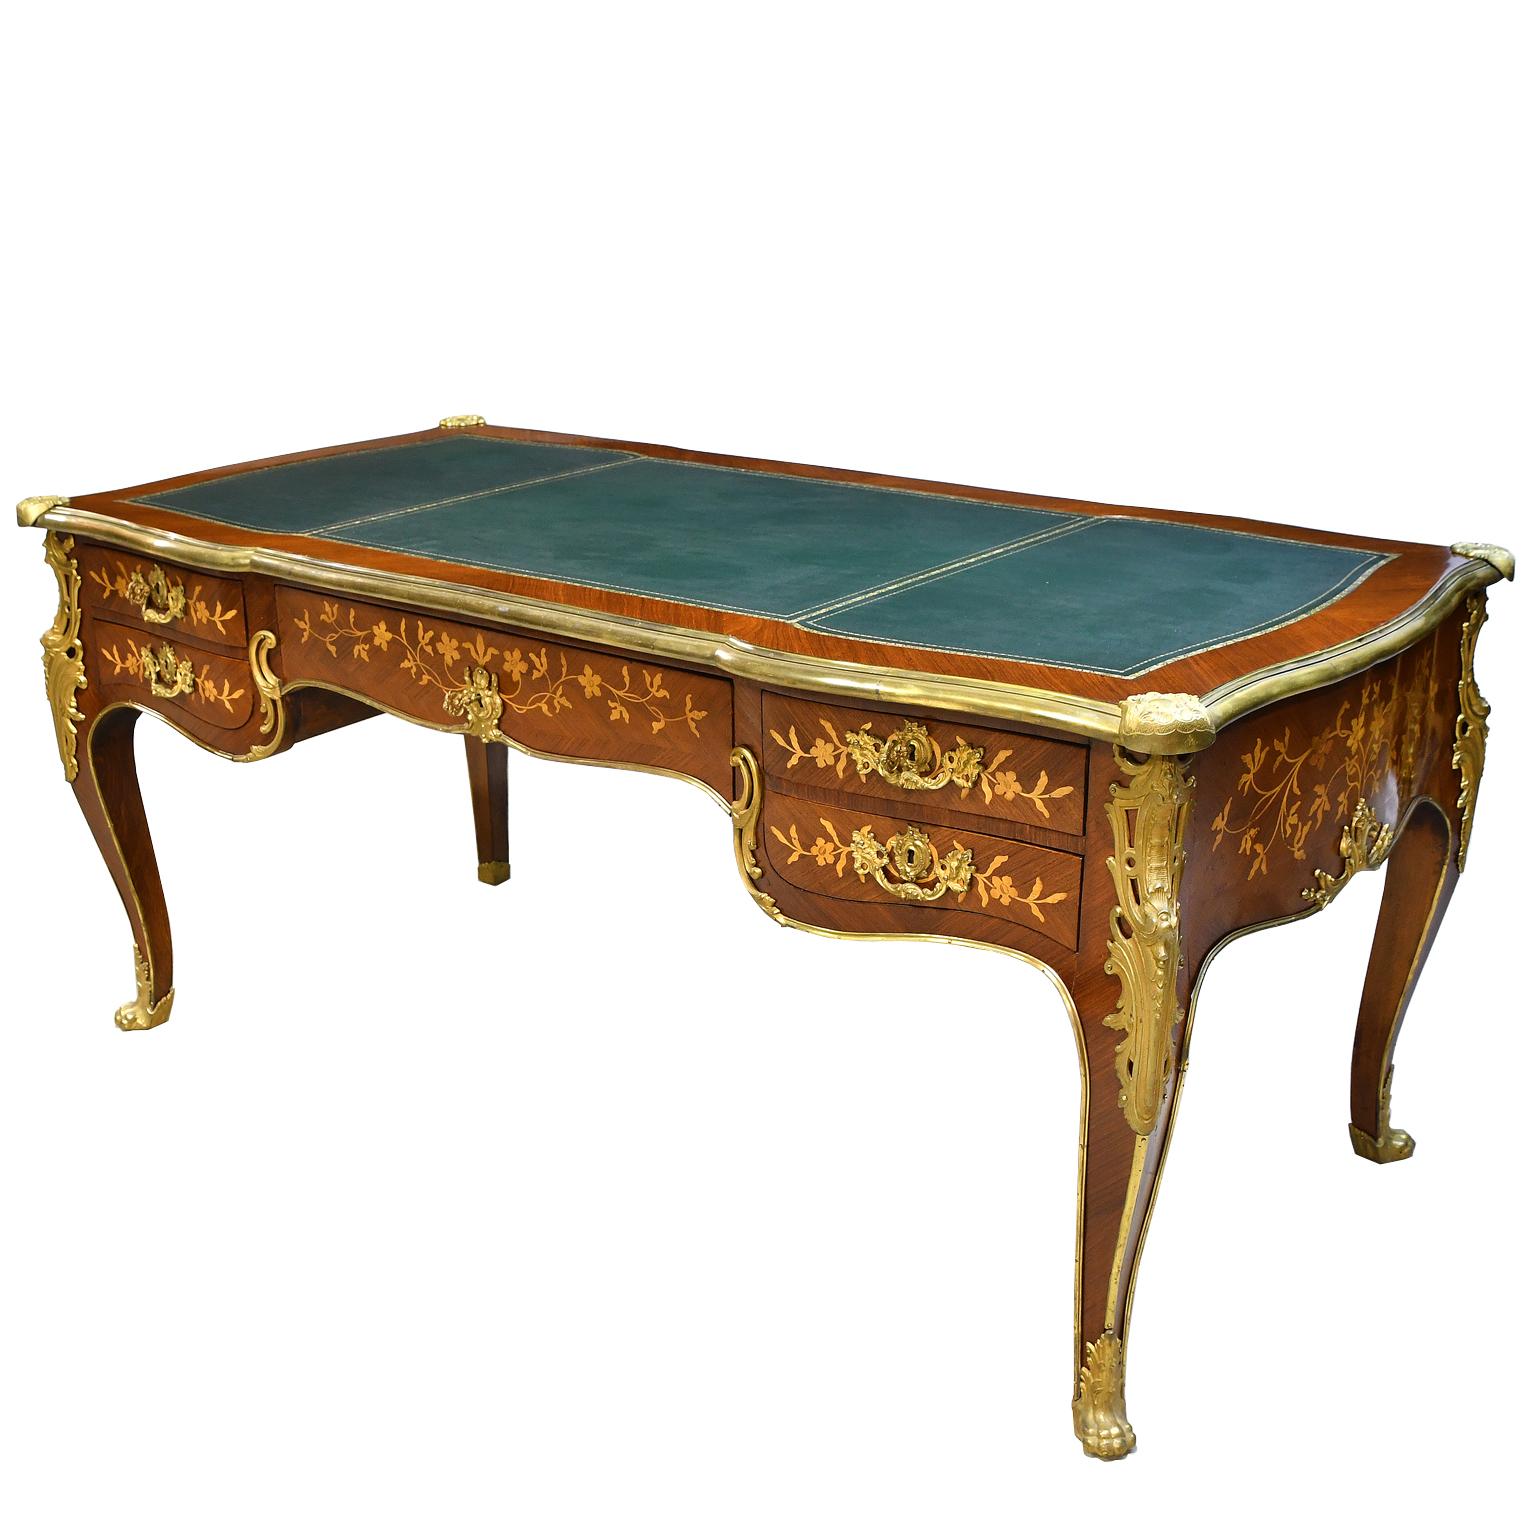 20th Century French Bureau Plat with Parquetry, Marquetry and Ormolu, circa 1910